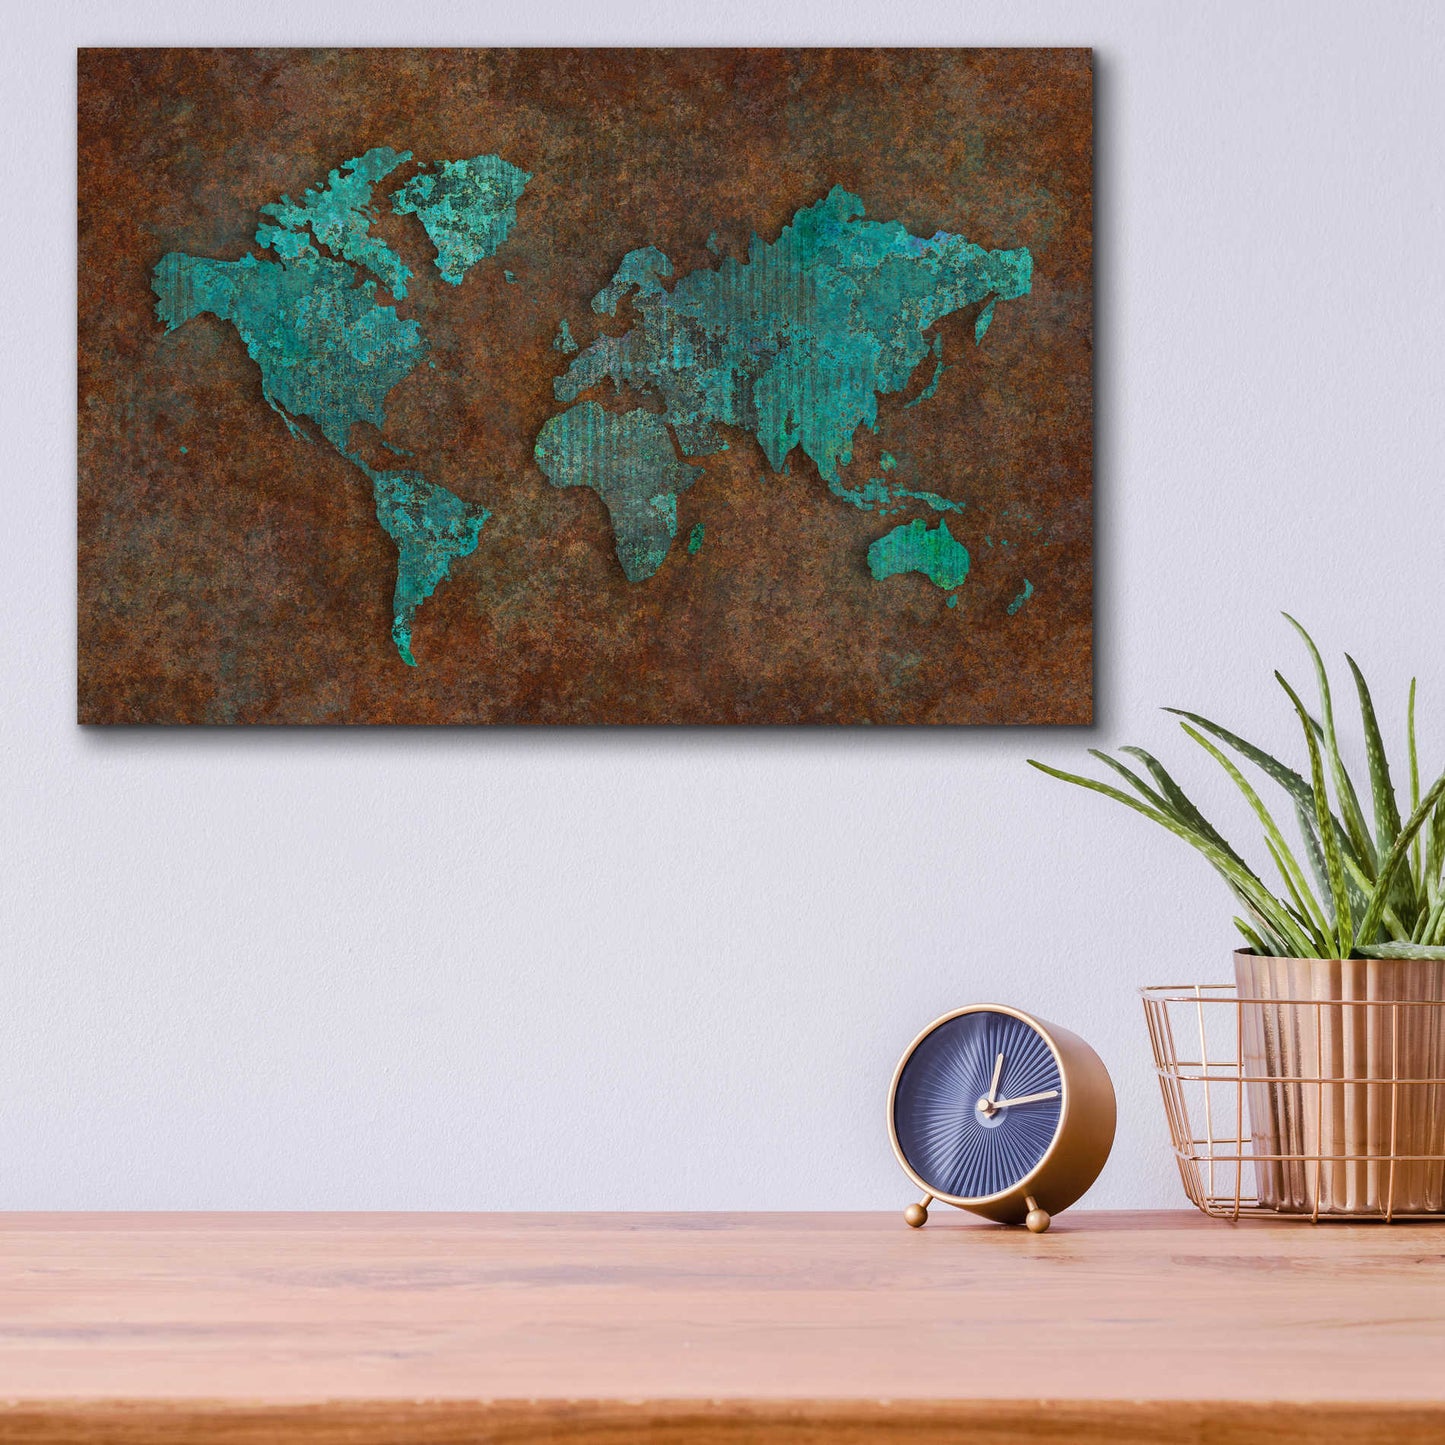 Epic Art 'Rusted World' by Andrea Haase Acrylic Glass Wall Art,16x12